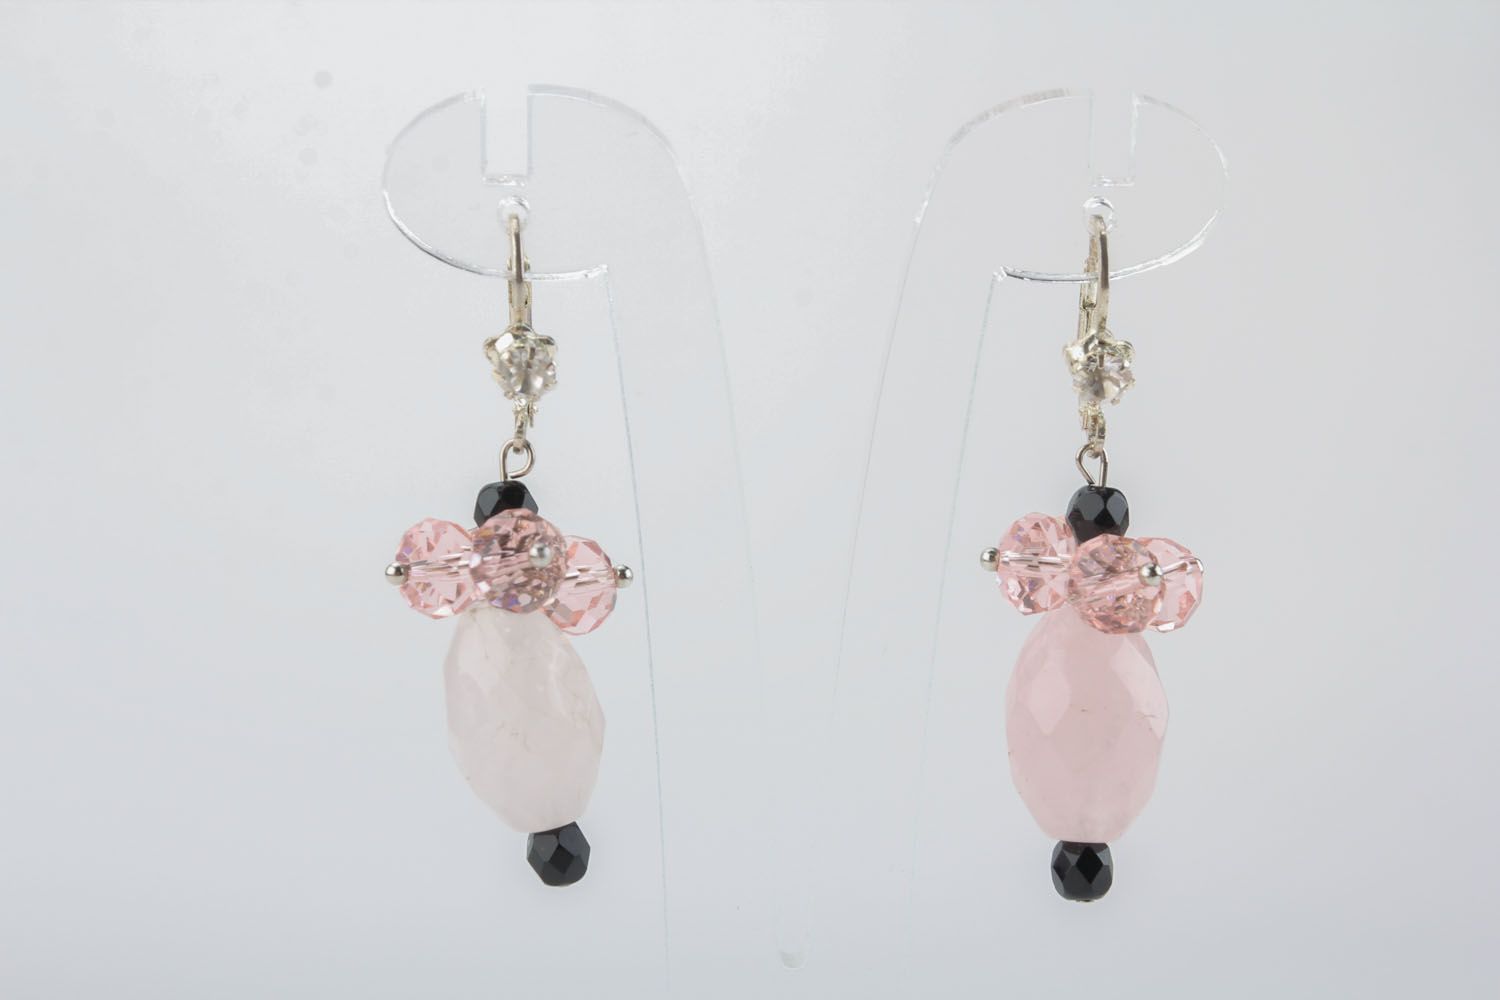 Earrings with natural stones photo 1